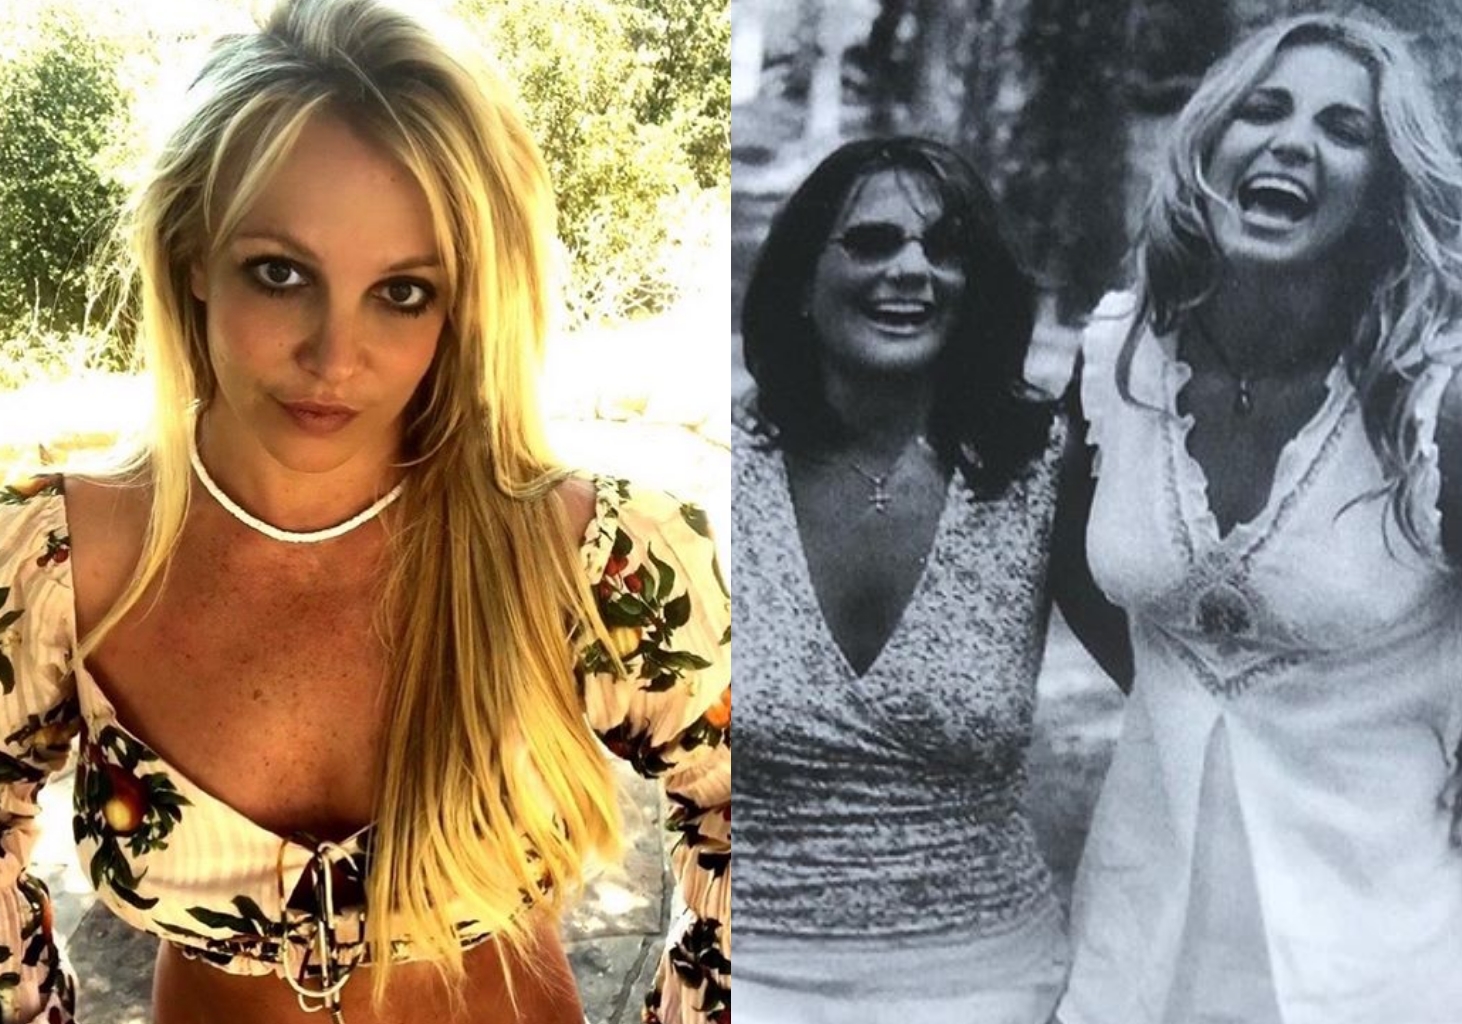 "We've shared the best laugh" – Britney Spears celebrate mother's birthday (Photos)